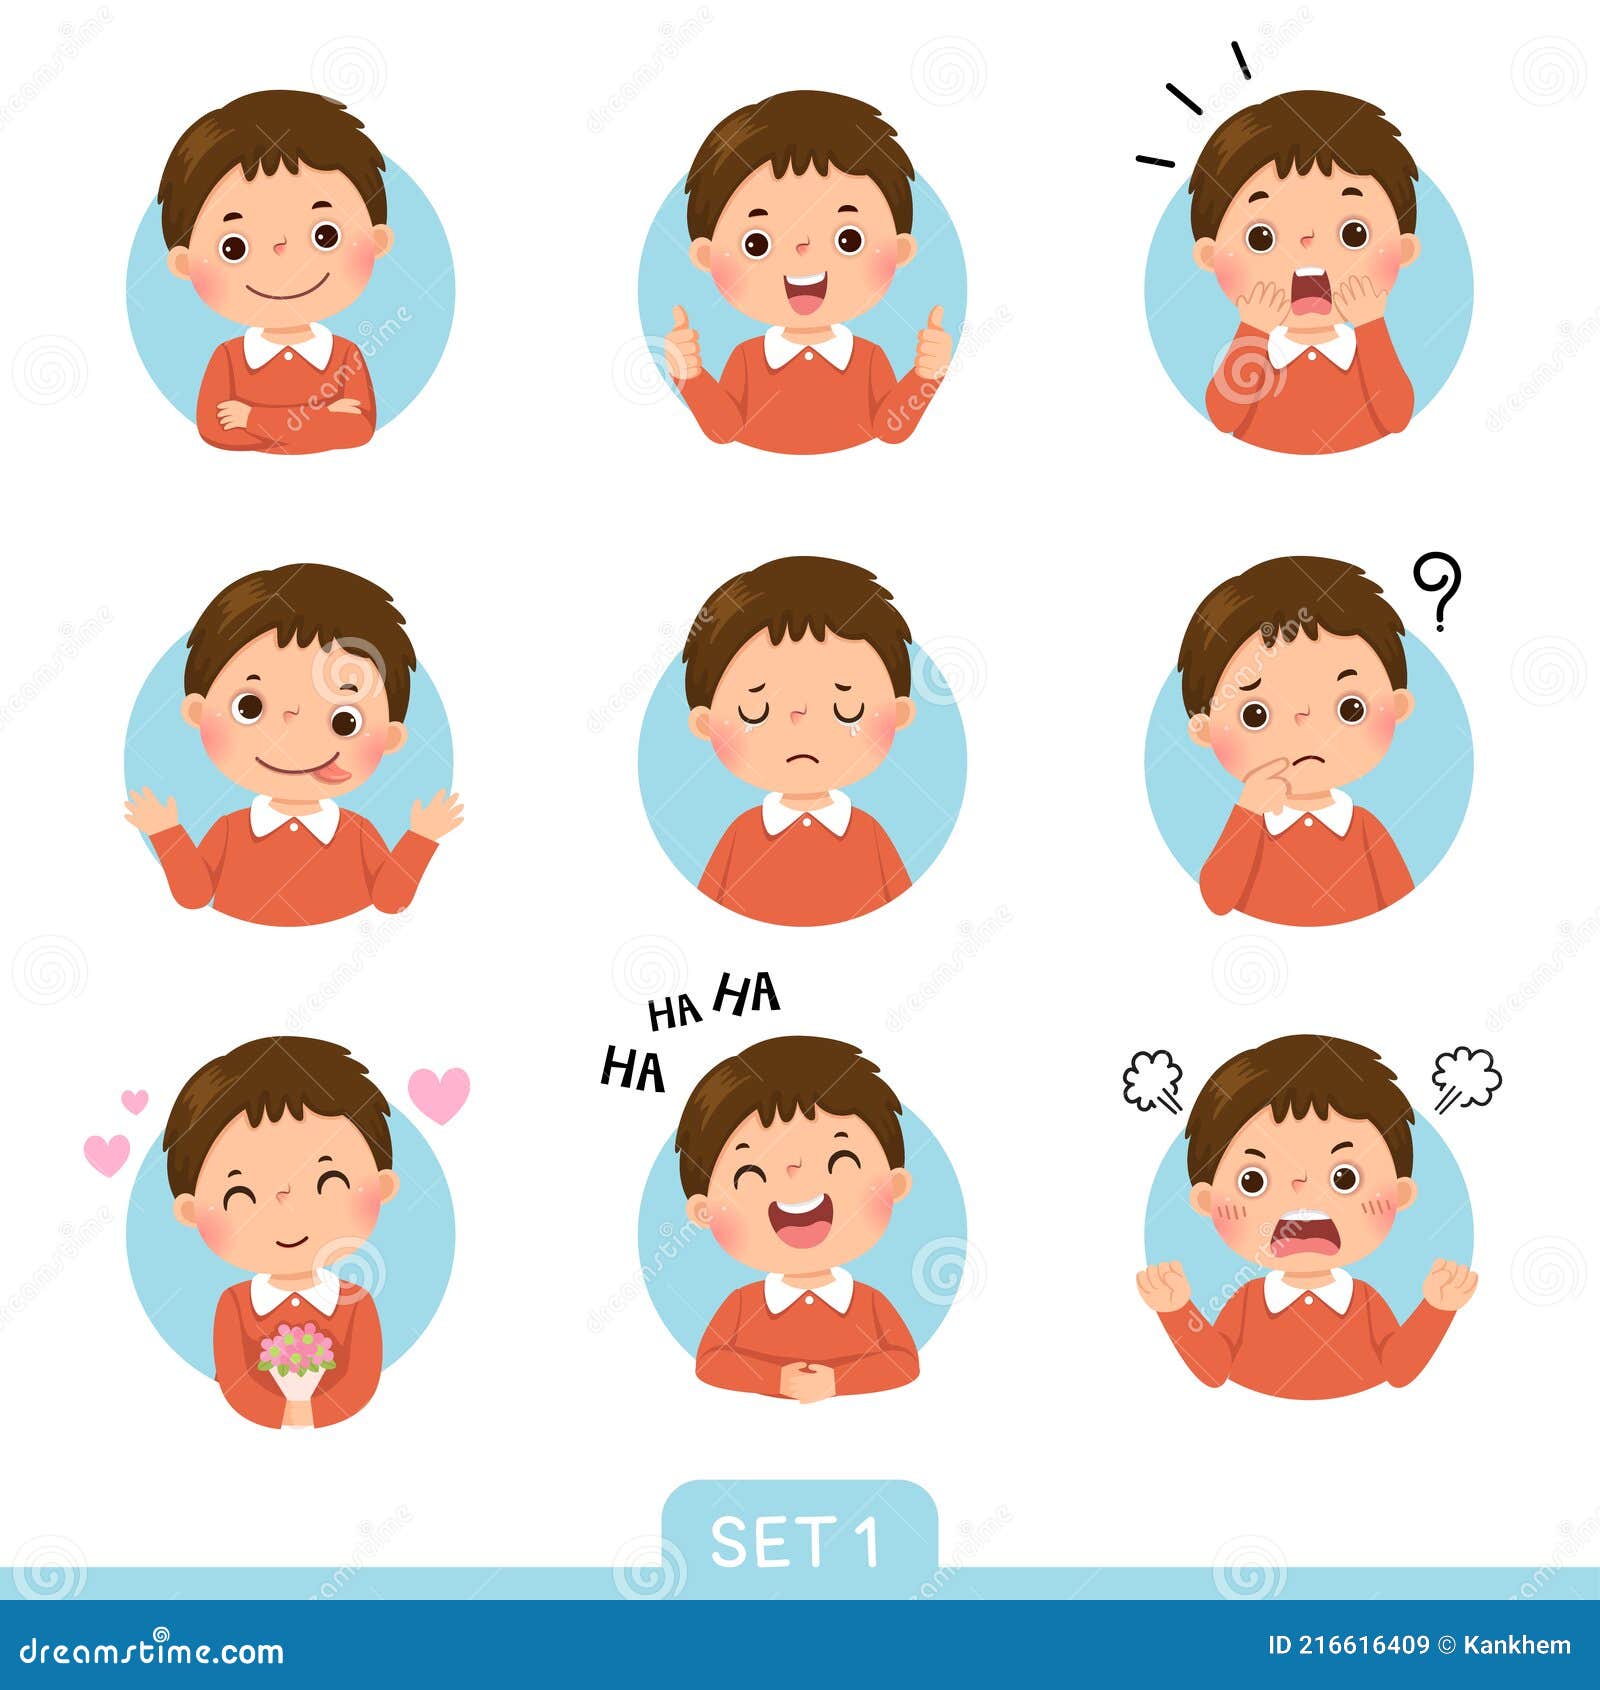 cartoon set of a little boy in different postures with various emotions. set 1 of 3